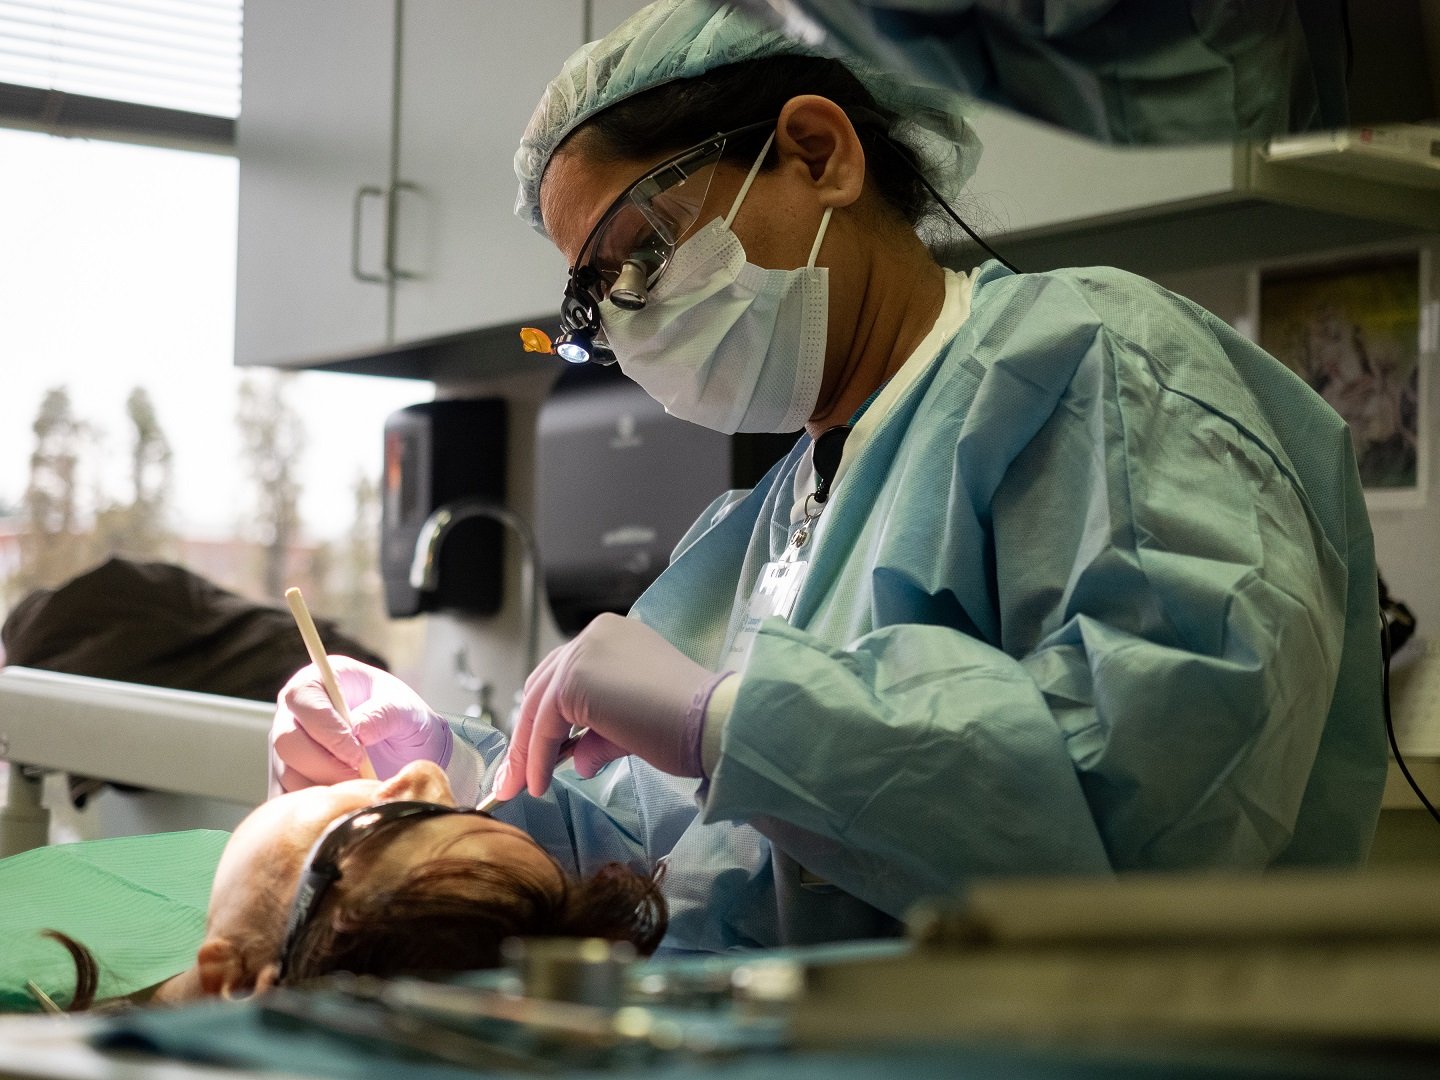 A female dentist works on a patient